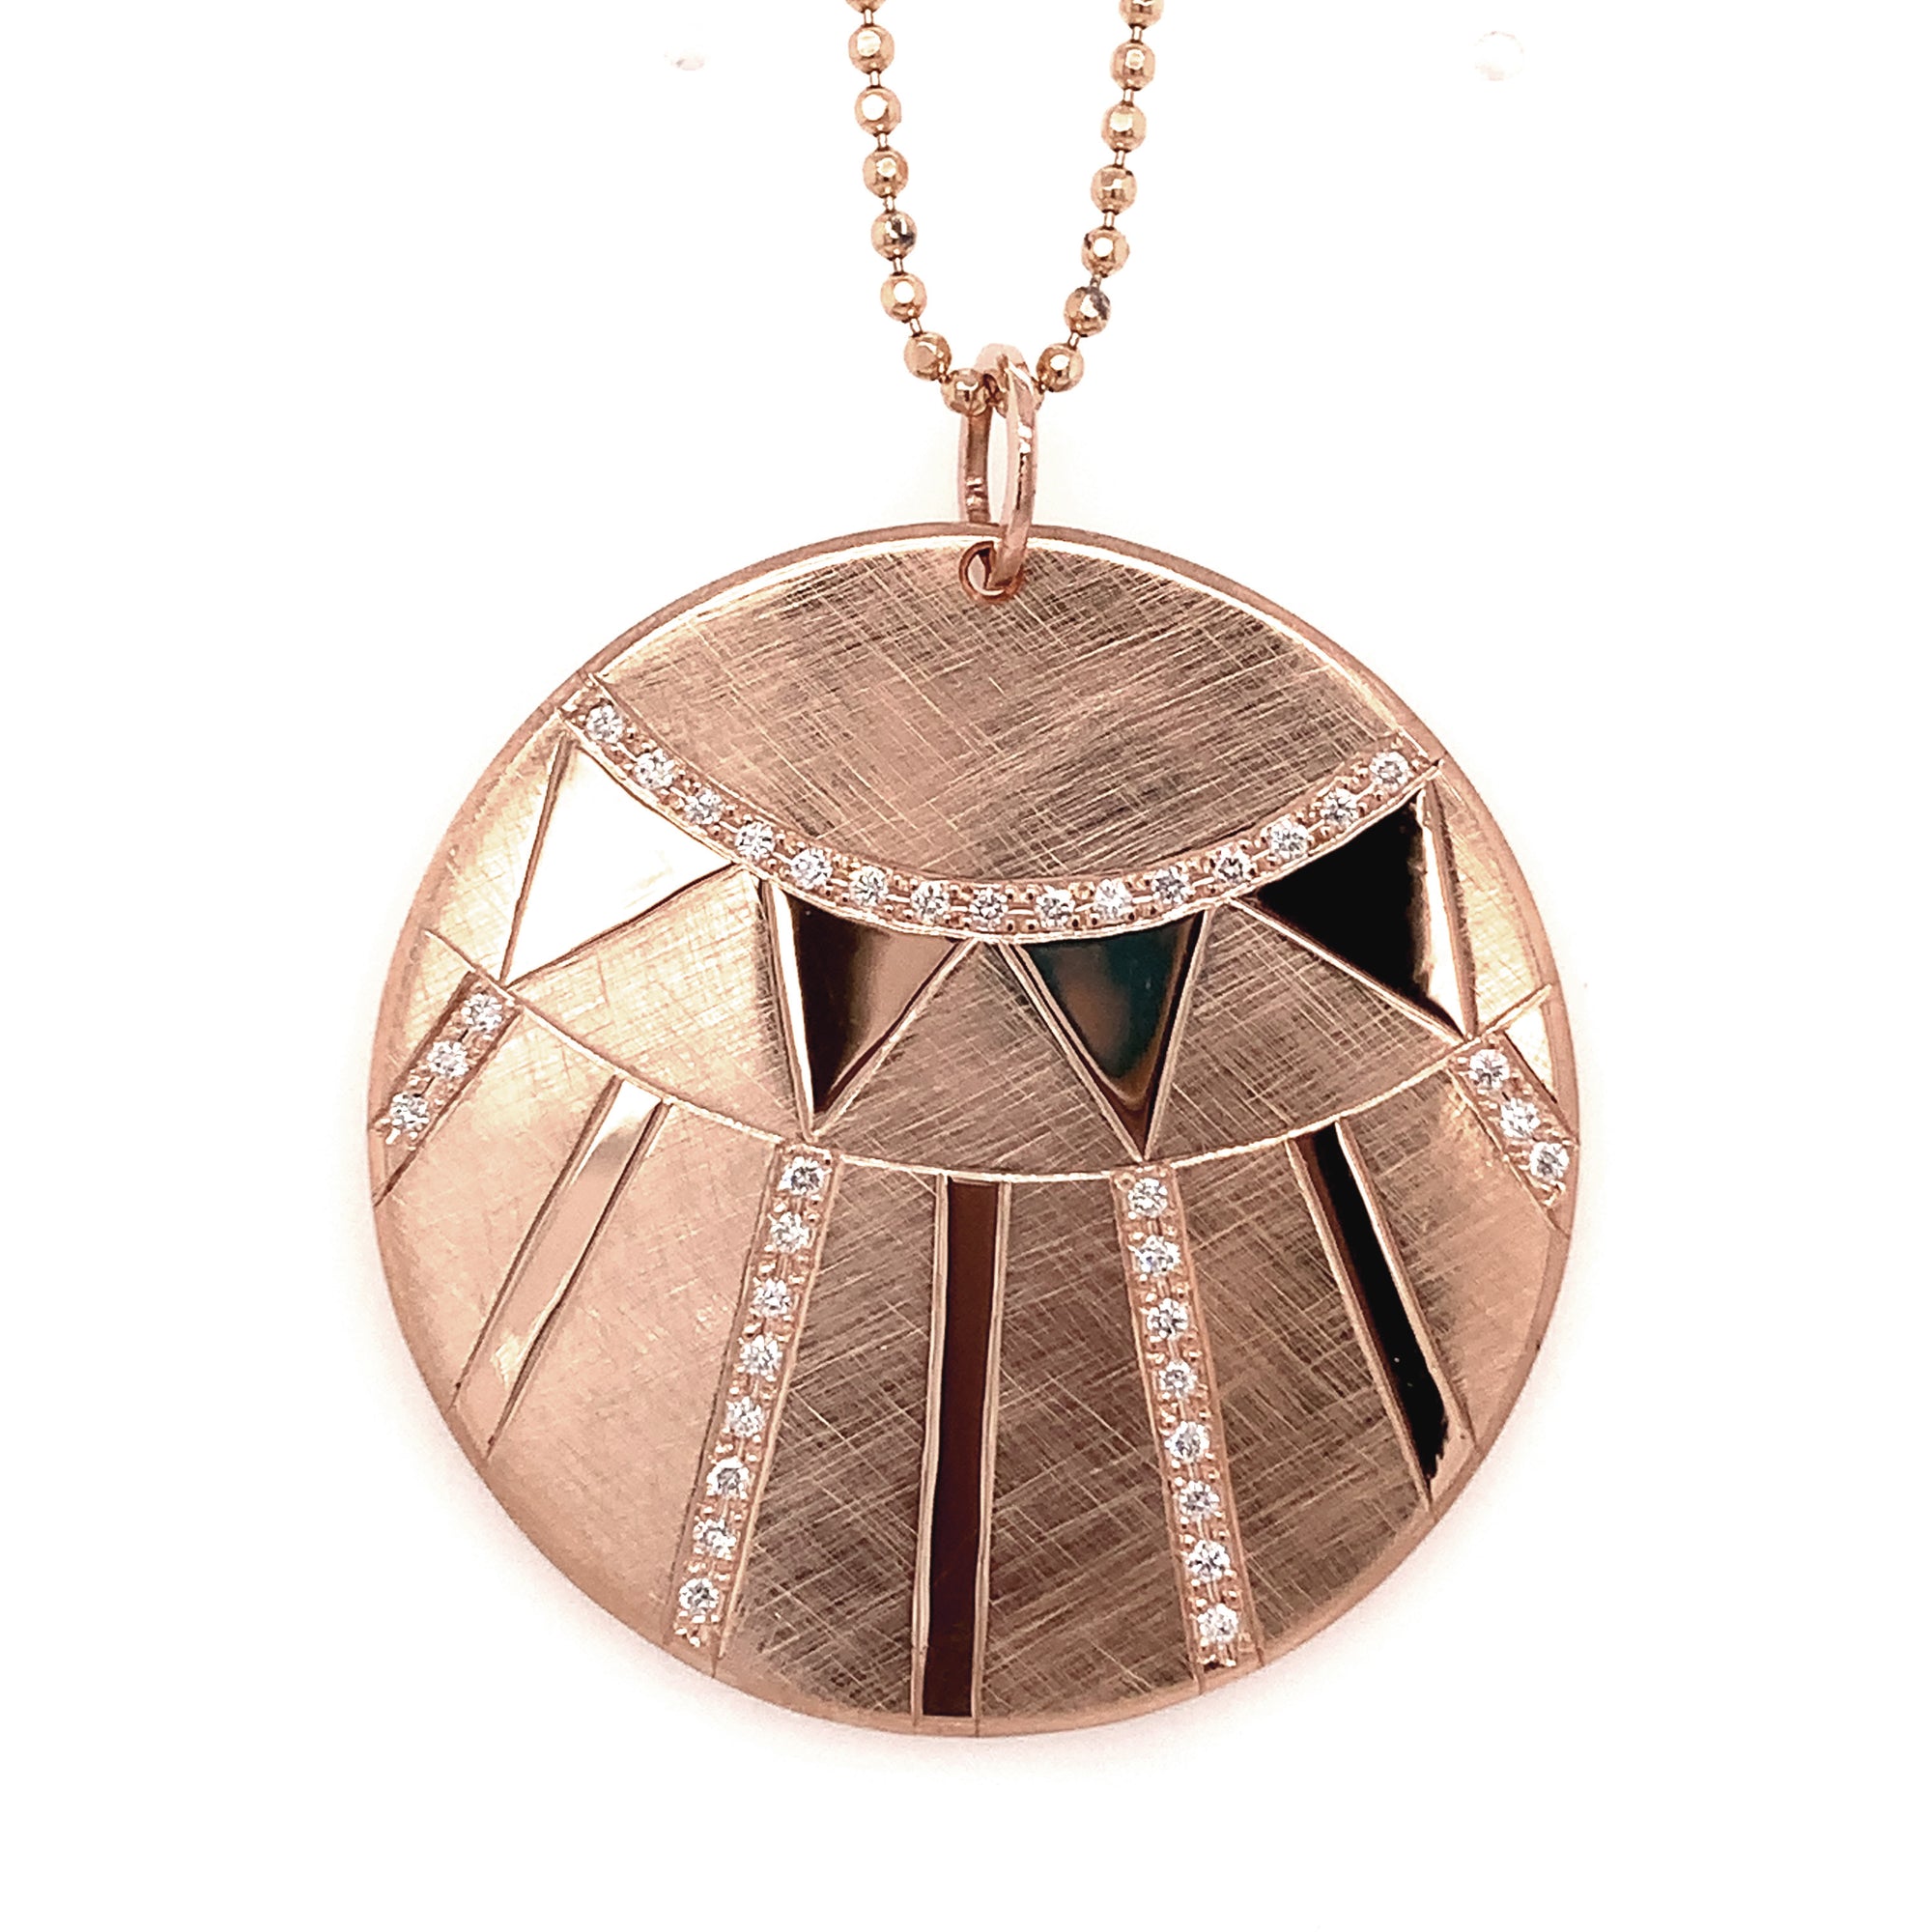 14k rose gold x-large JONO round medallion with complimenting satin and shiny finish with accent lines of white diamonds